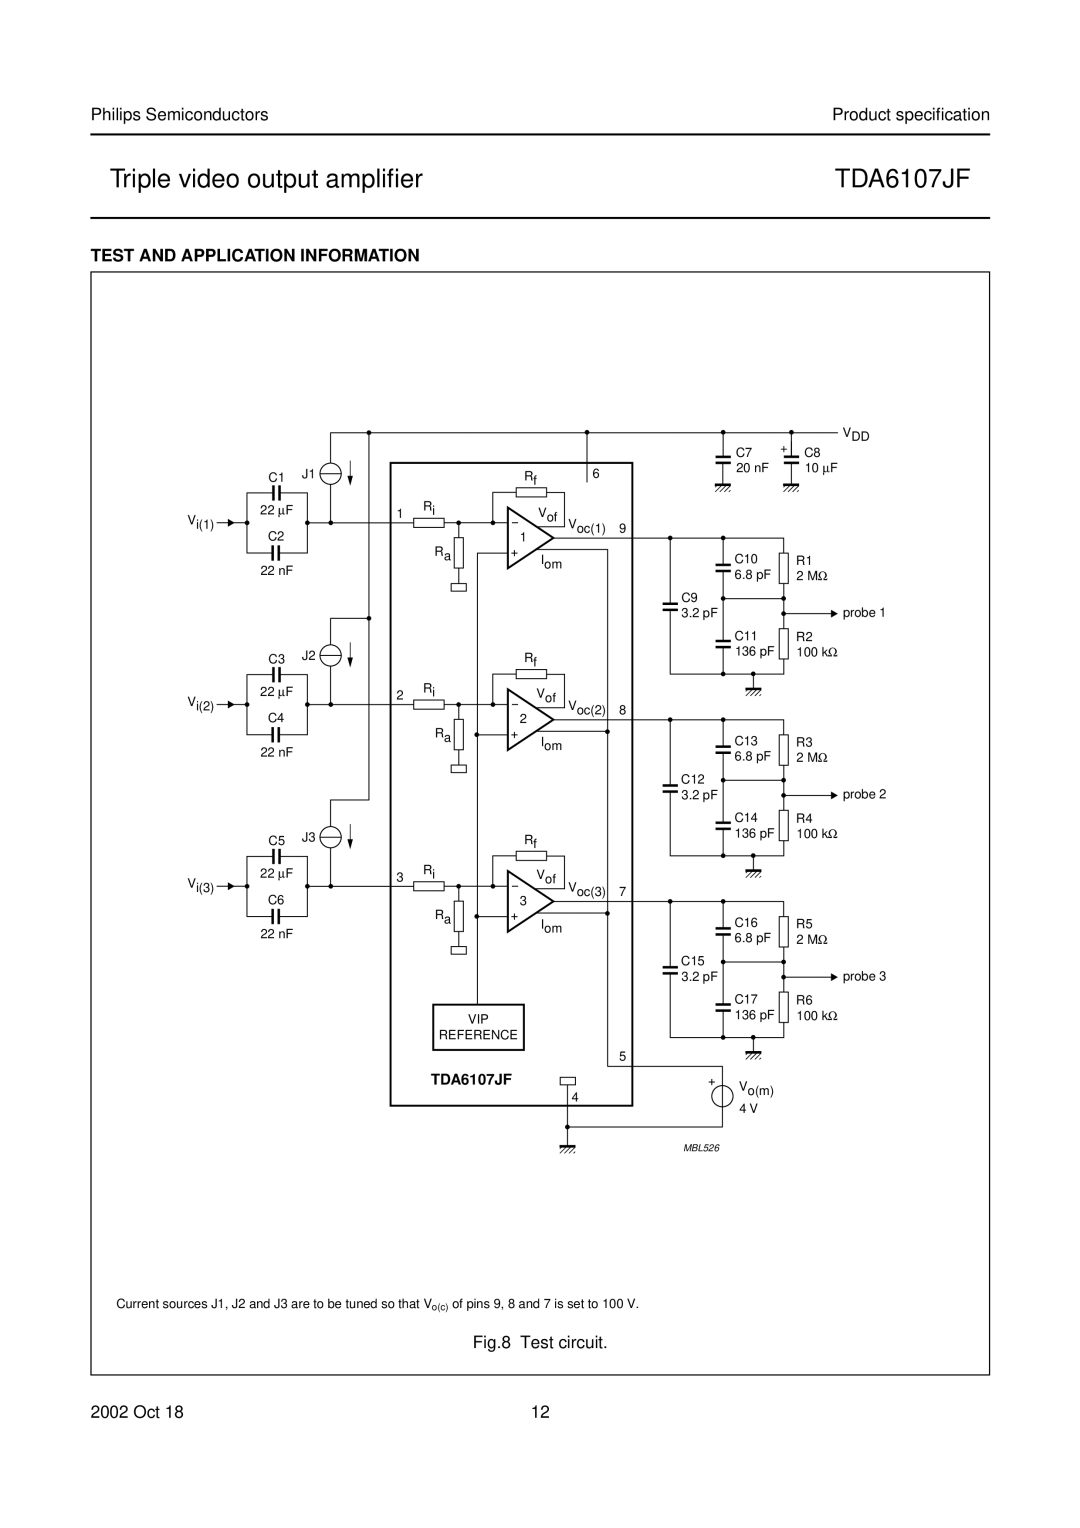 Philips TDA6107JF Test And Application Information, Triple video output ampliﬁer, Philips Semiconductors, Test circuit 